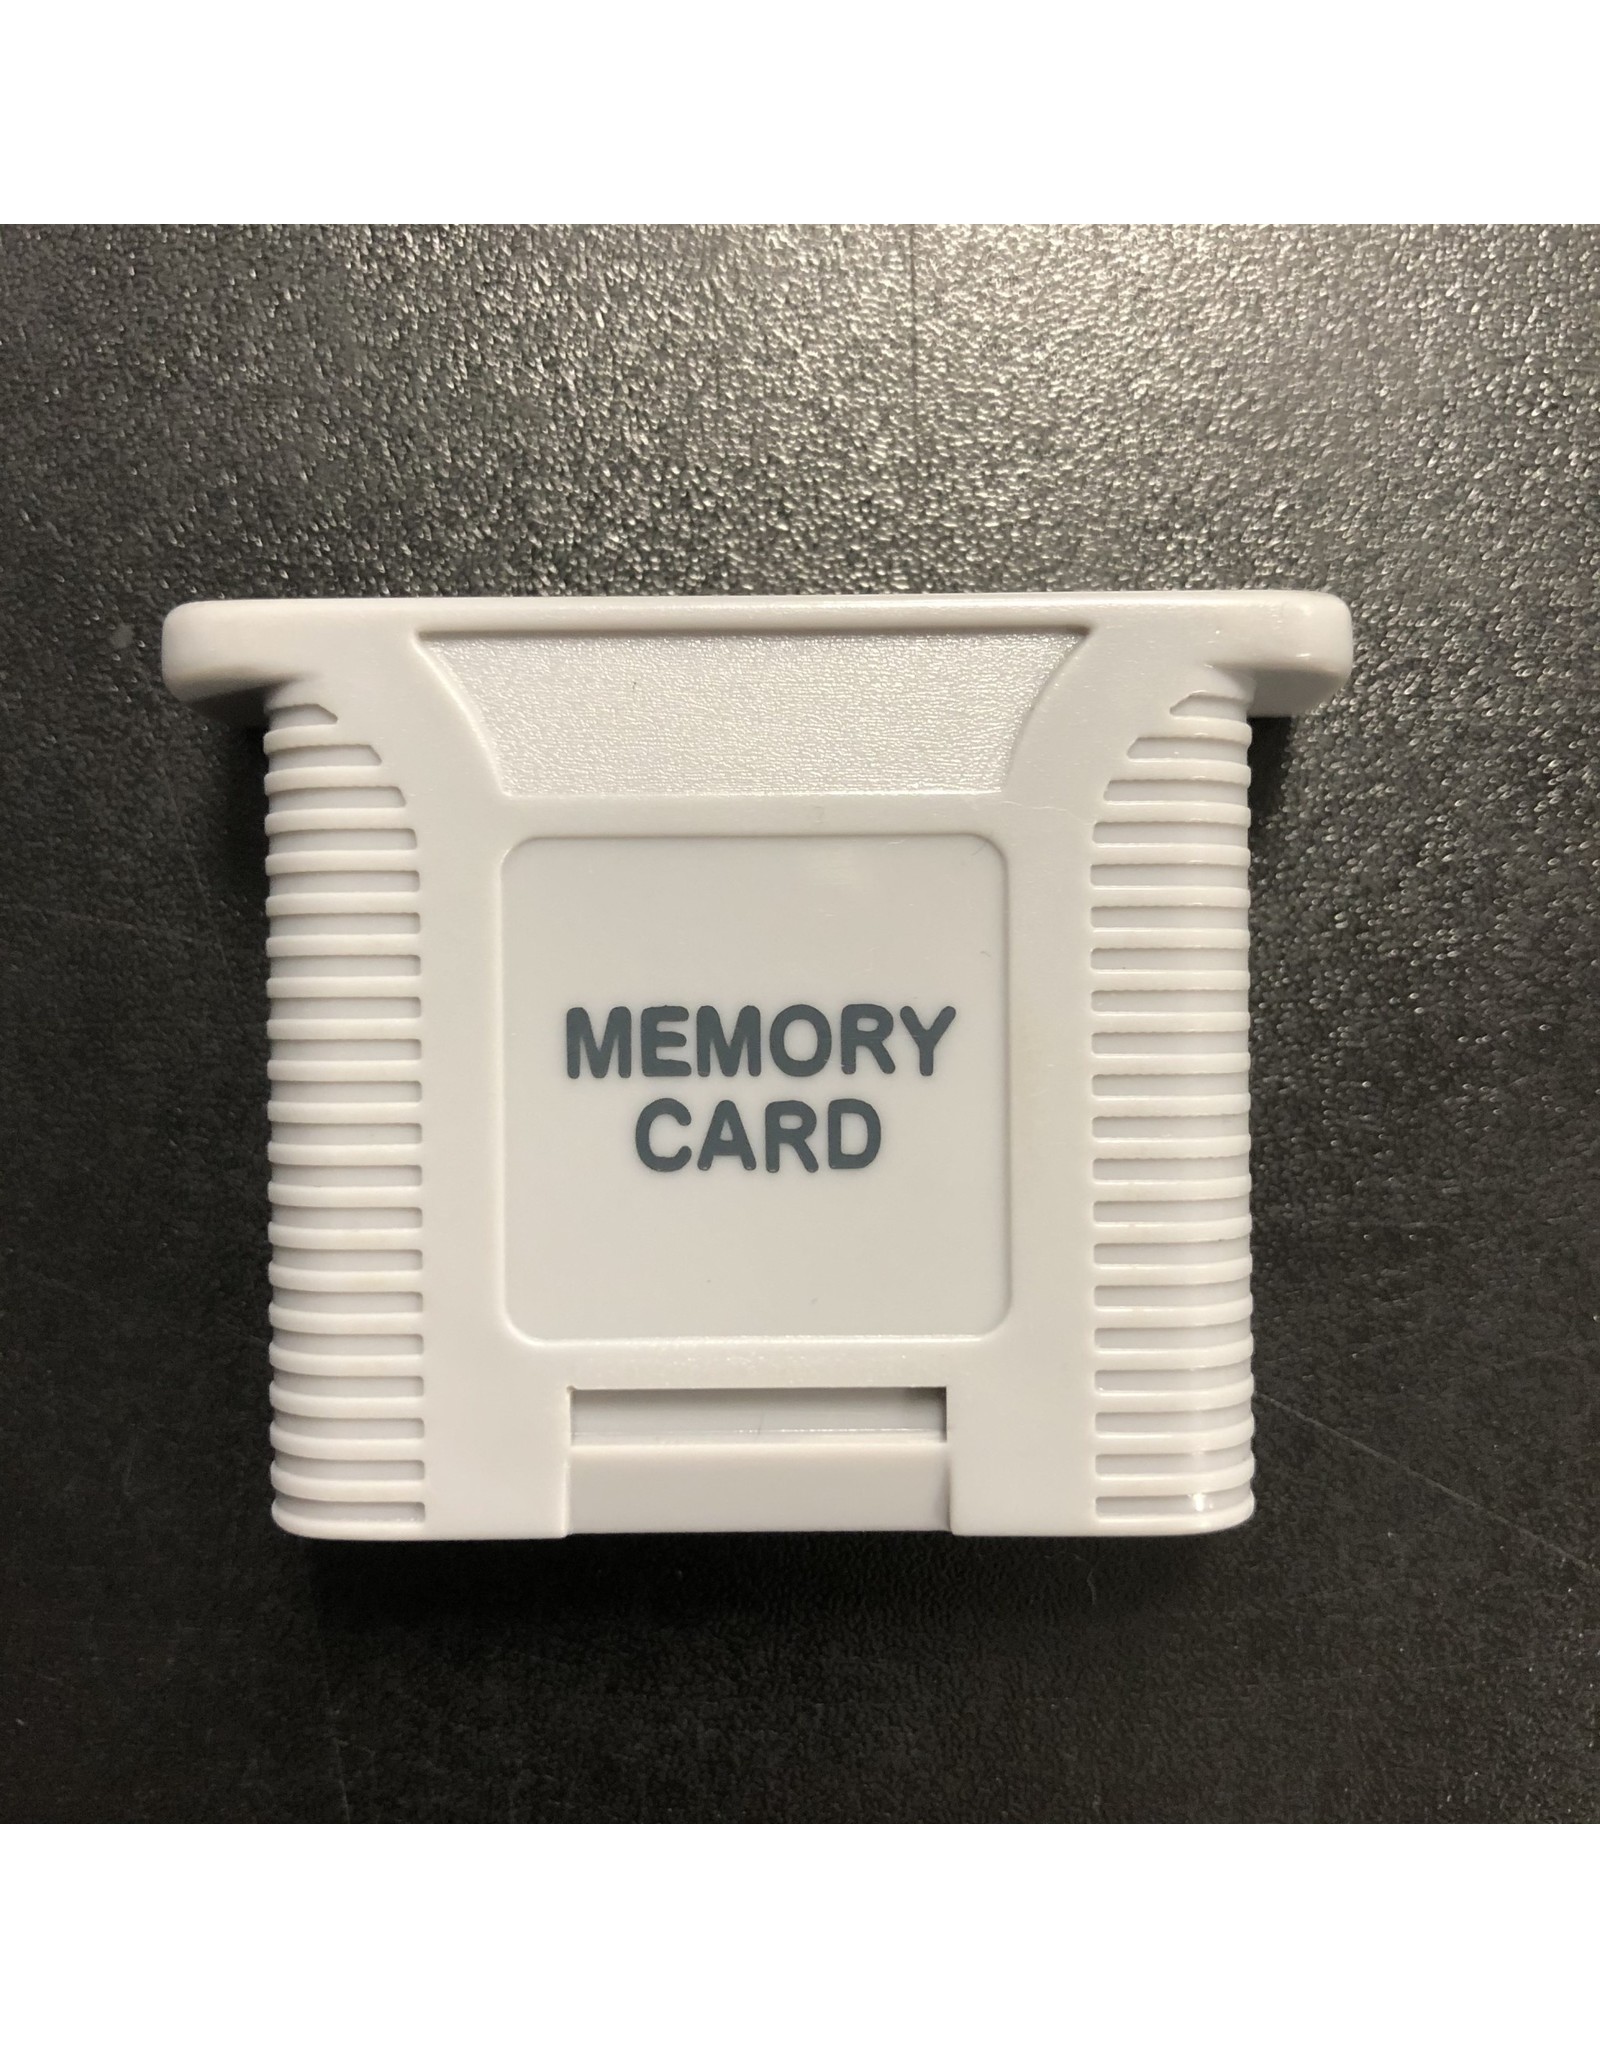 Nintendo 64 N64 Nintendo 64 Memory Card (3rd Party, Used, Assorted Brands/Colors)